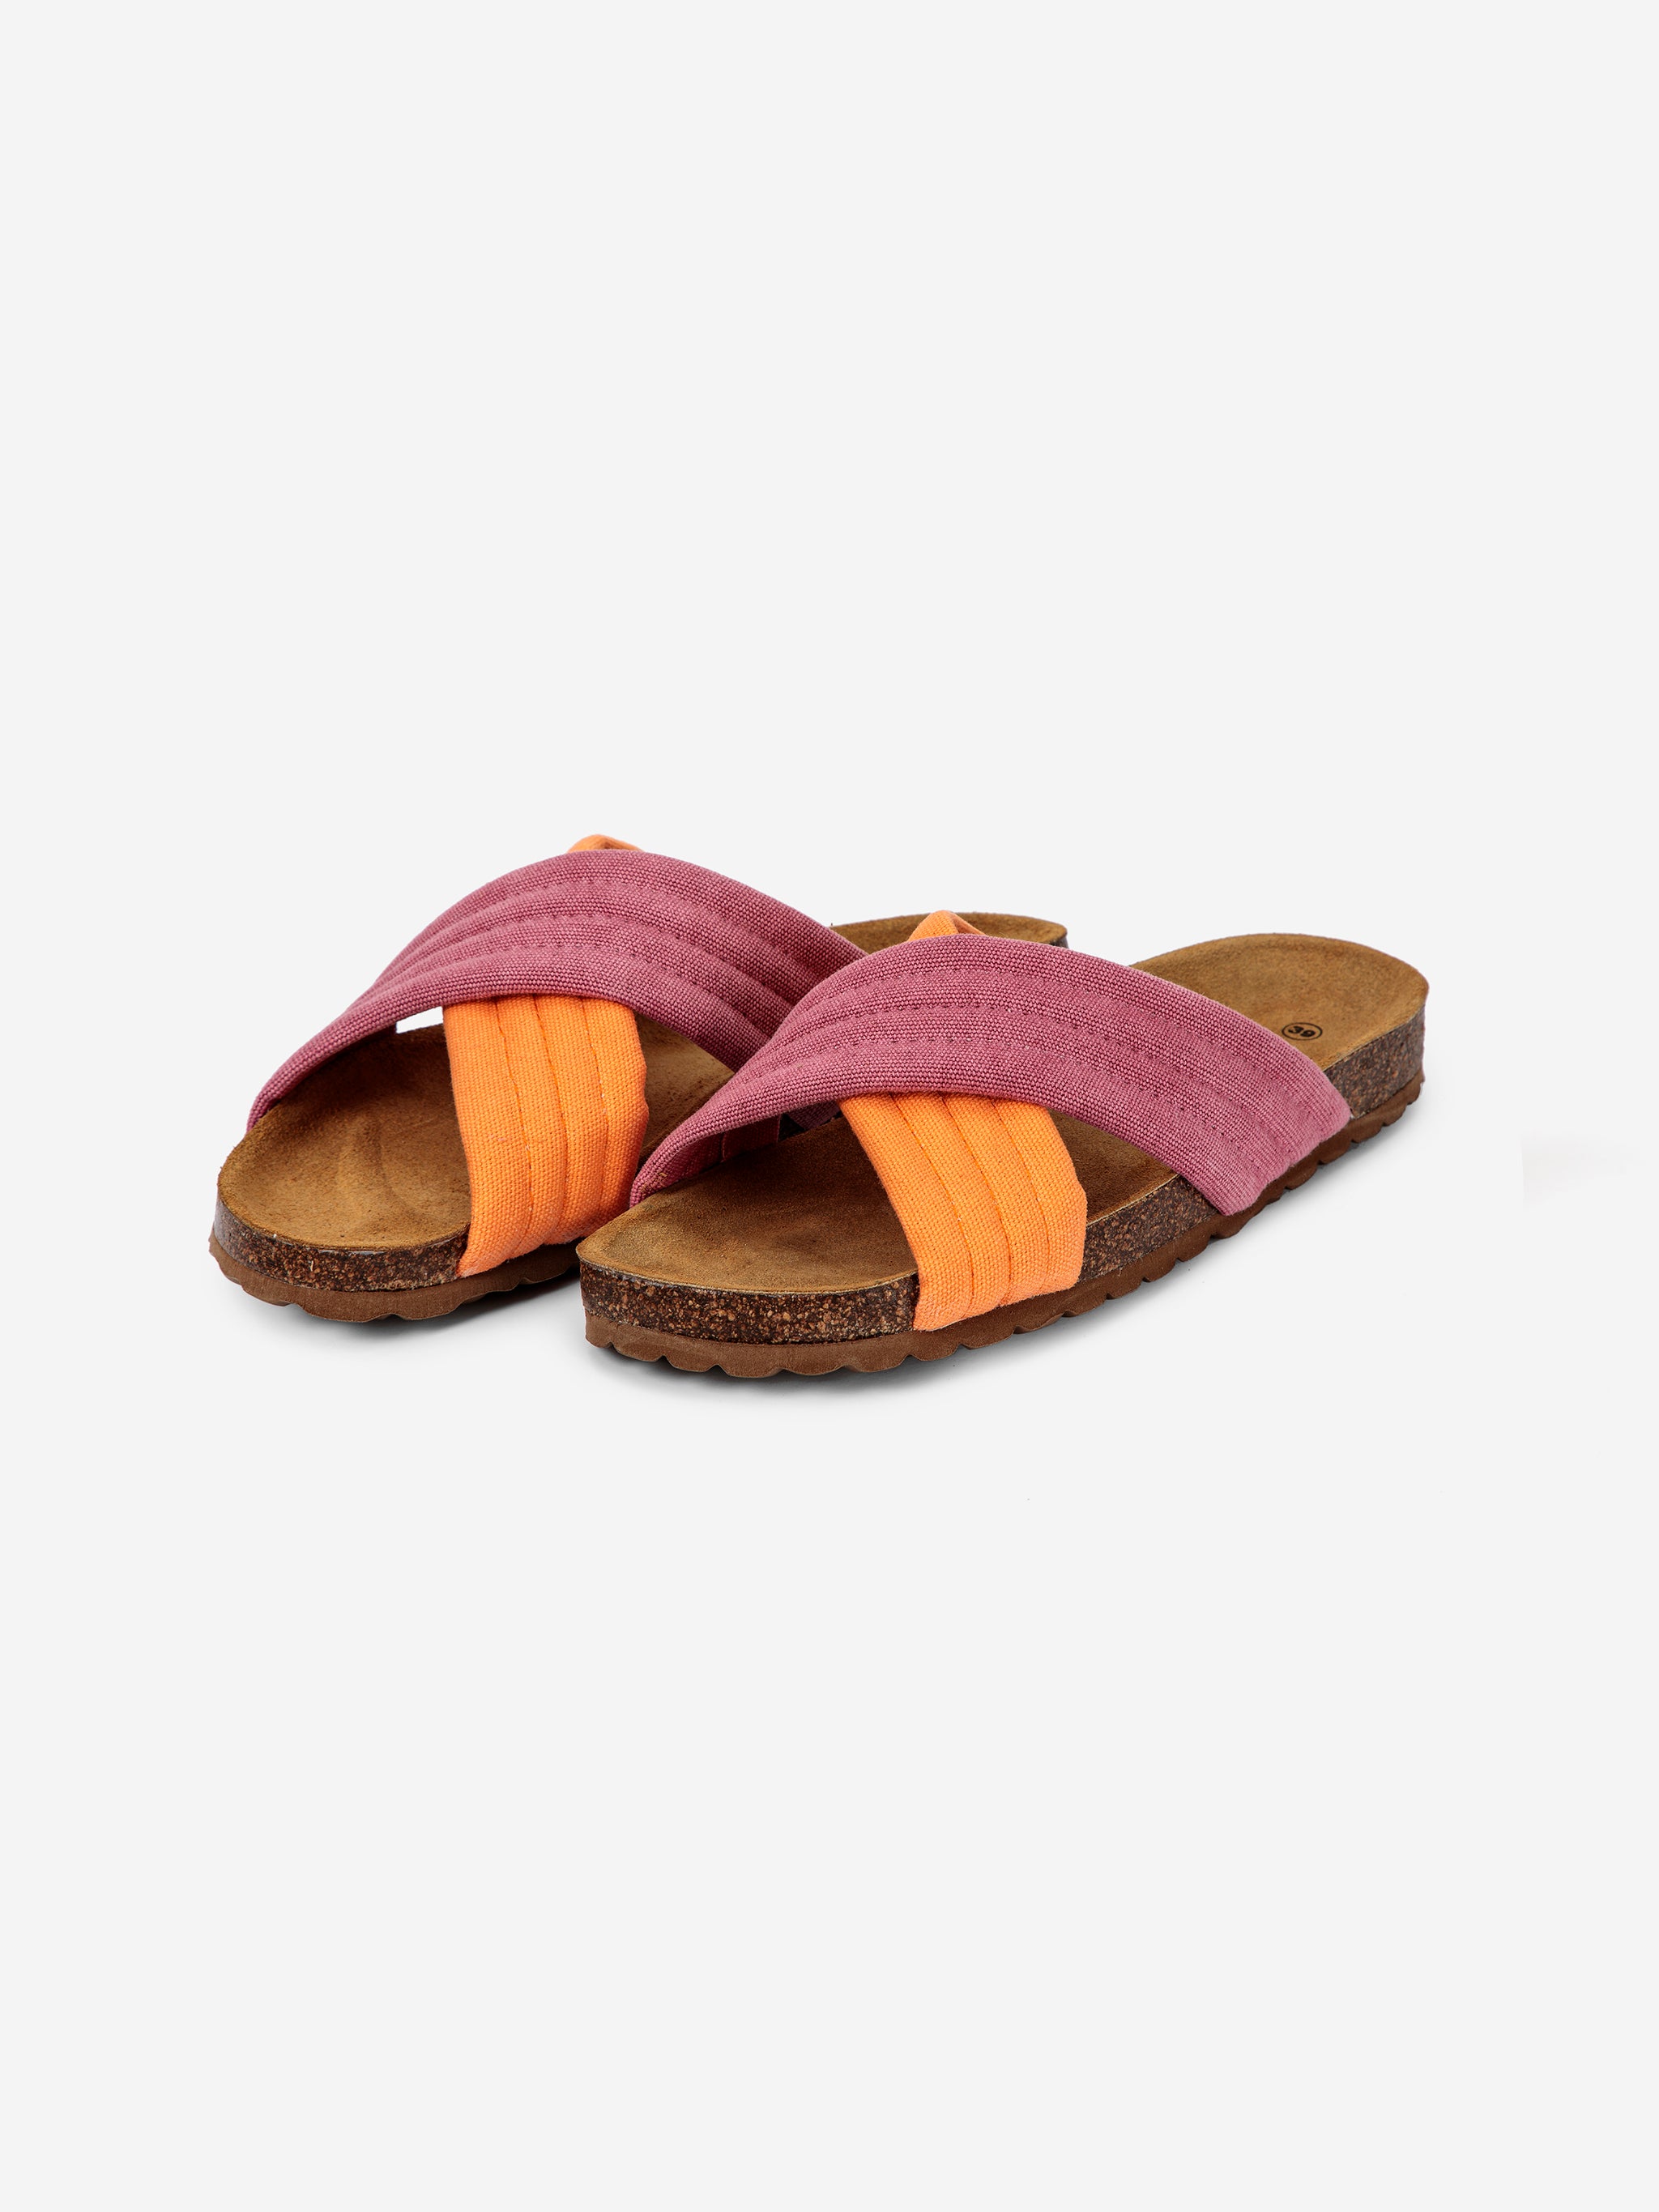 BOBO CHOSES  Pink Crossover Sandals / women